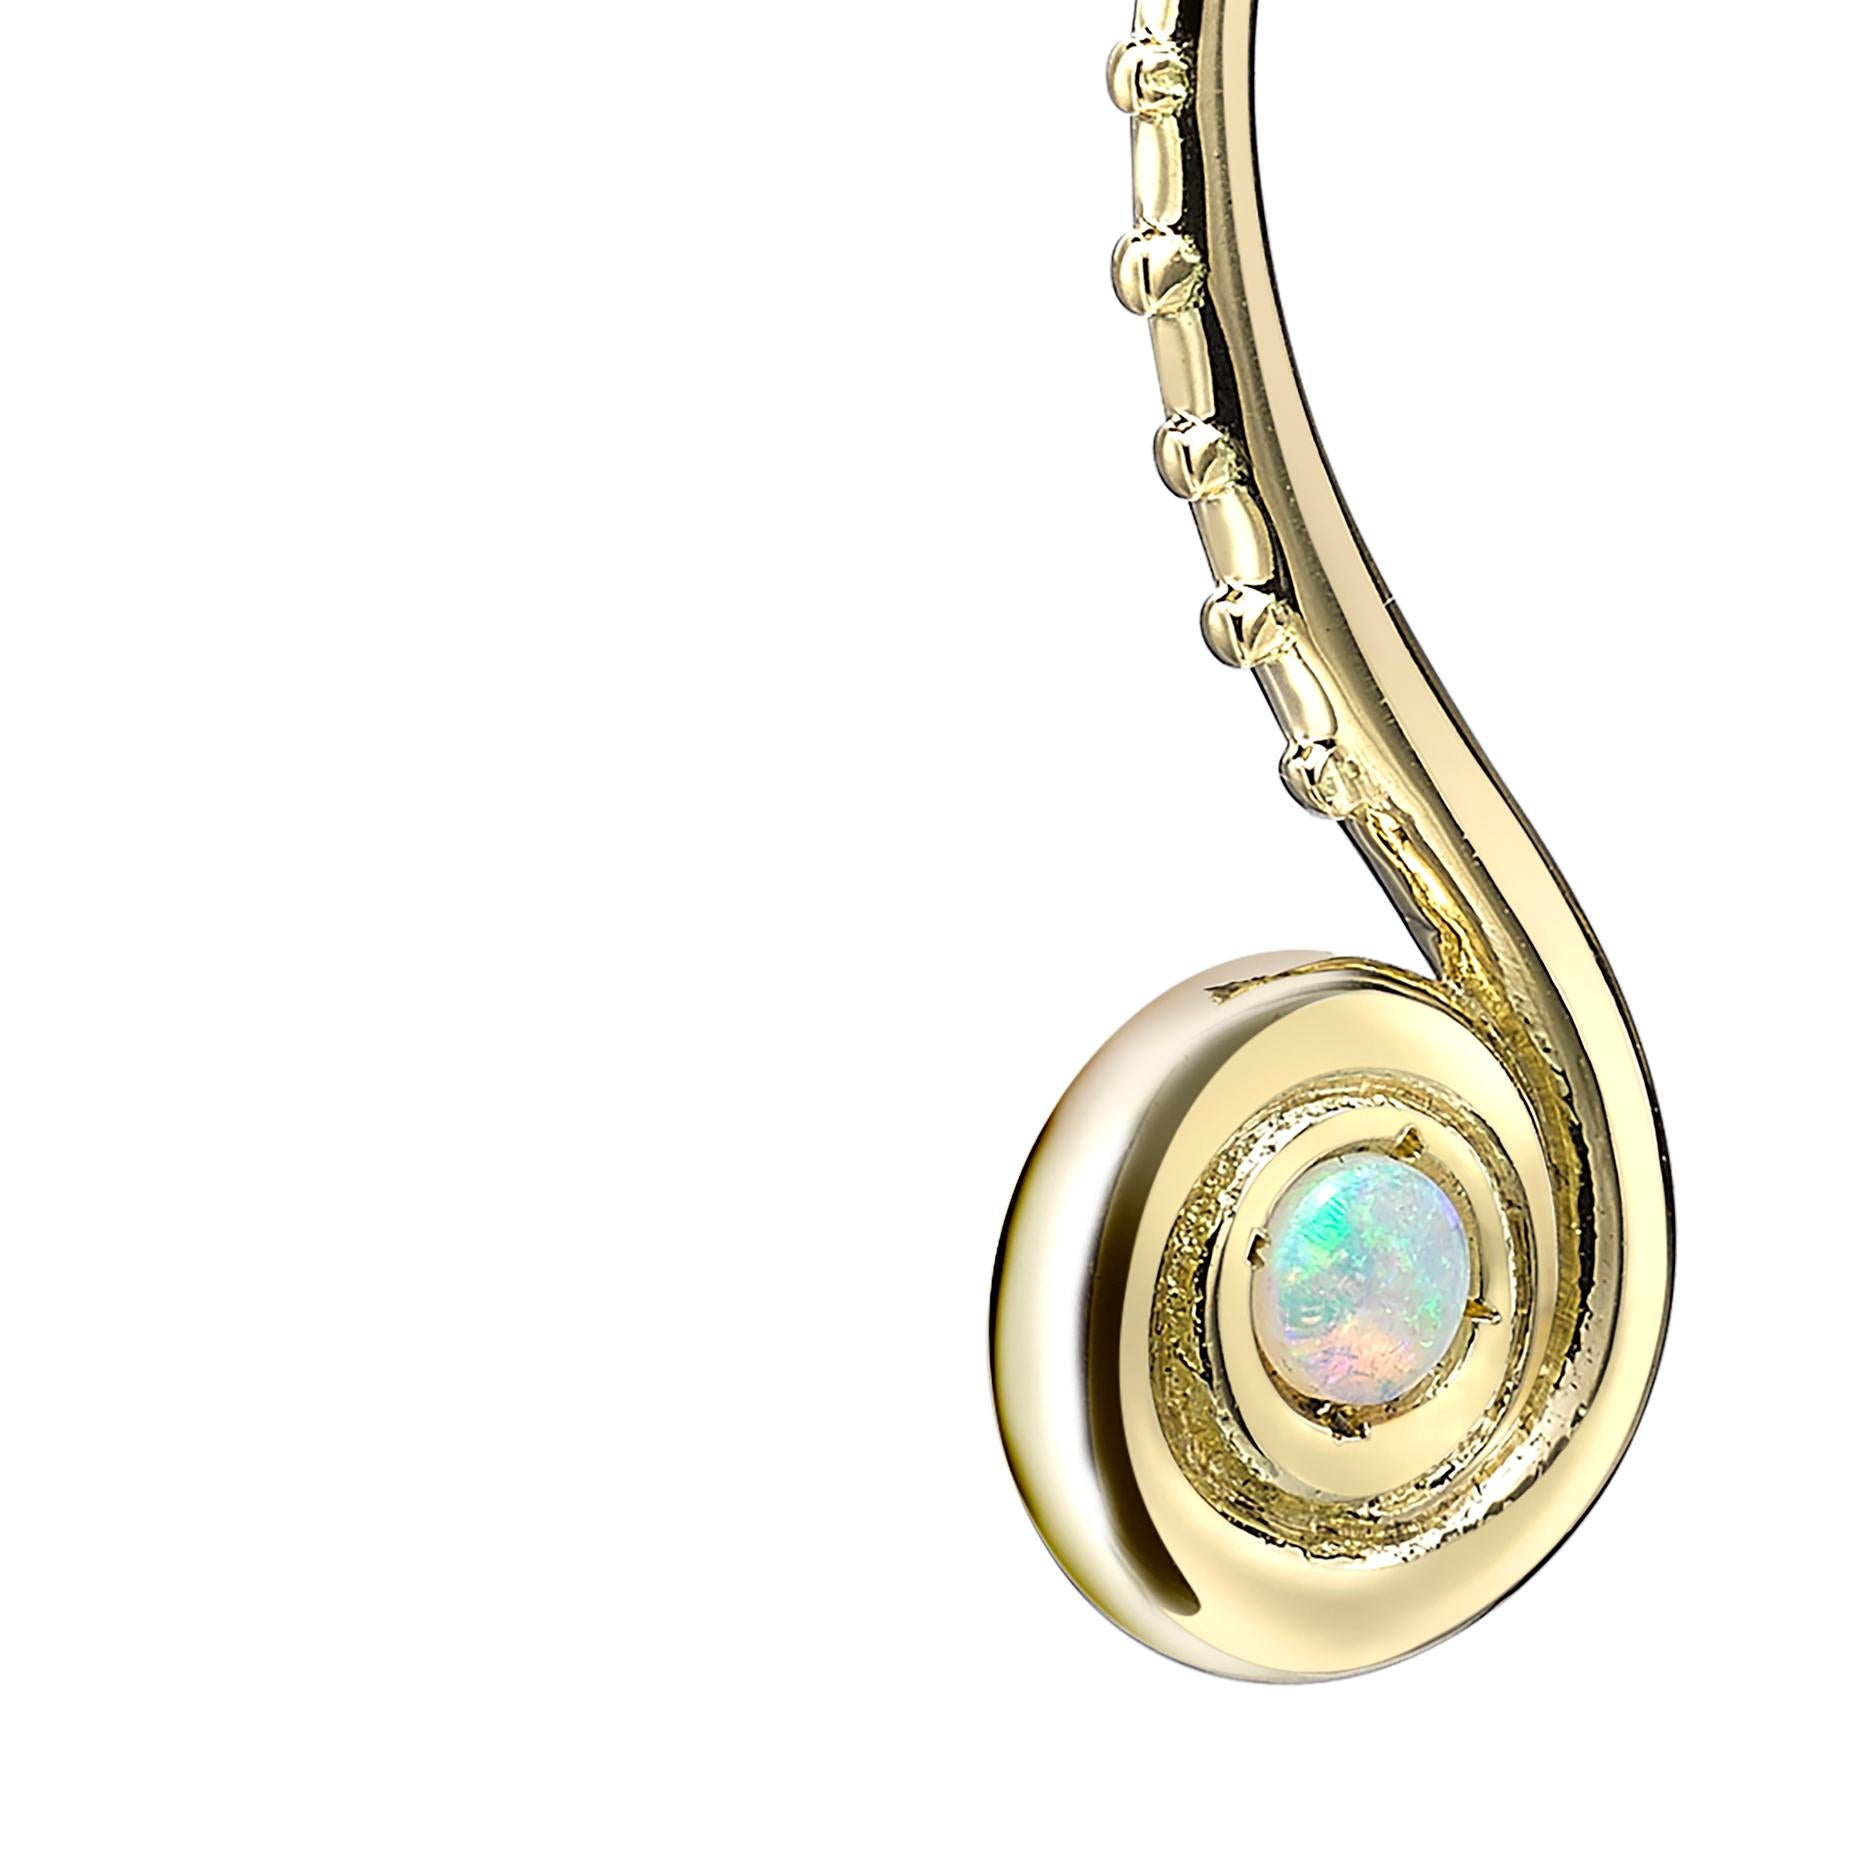 18k Yellow Gold approx. 5.05gr & 2 White Opals 0.15ct

The Pharaonys pieces are inspired by a type of cuttlefish that transforms and changes shape and colour. The pieces have tribal design elements to them and the spiral shapes are also a symbolic